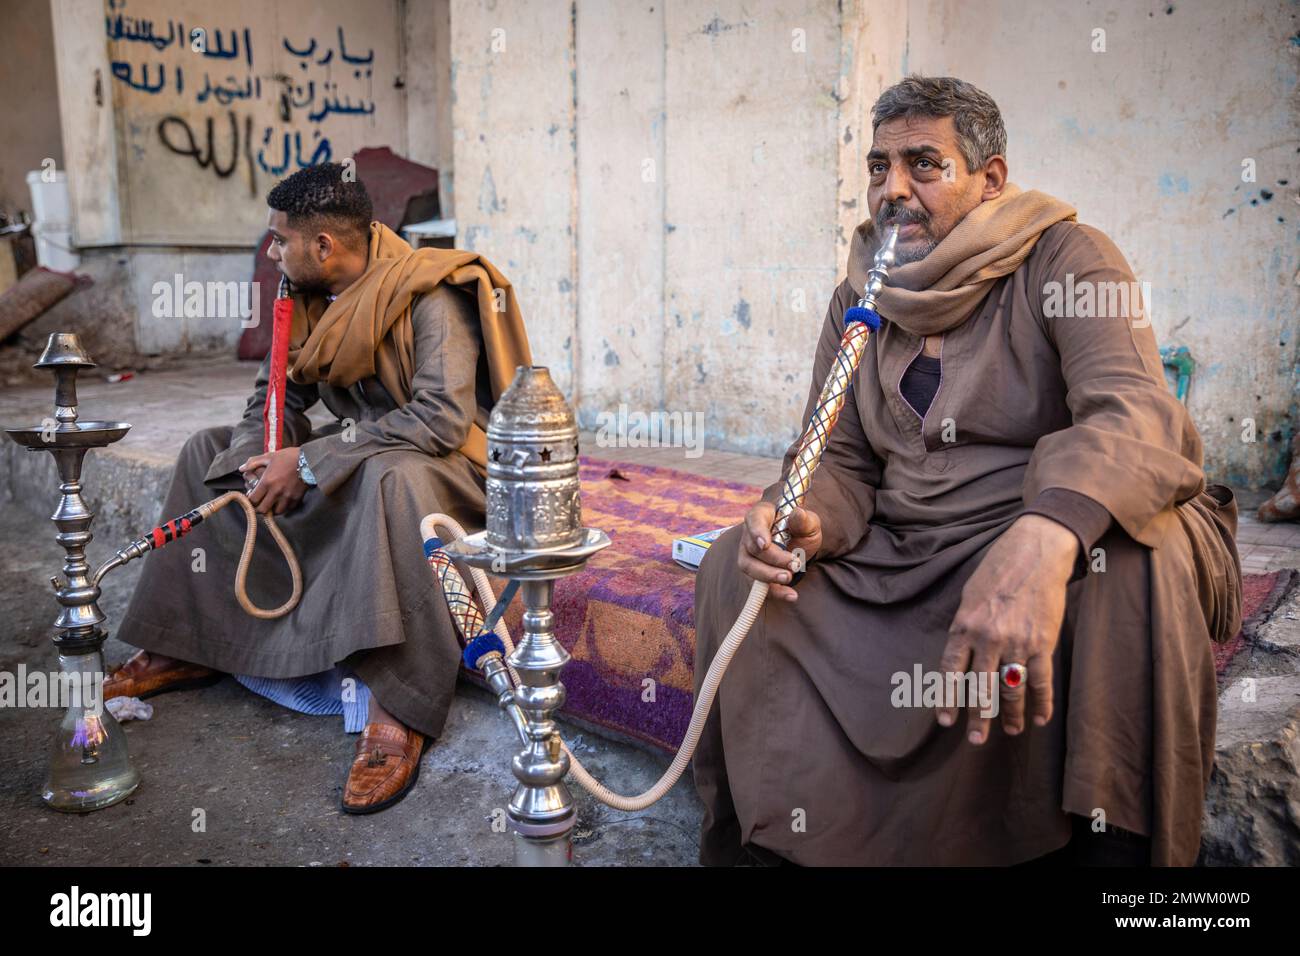 Egyptian men smoking shisha with hookahs in the streets of Luxor, Egypt Stock Photo